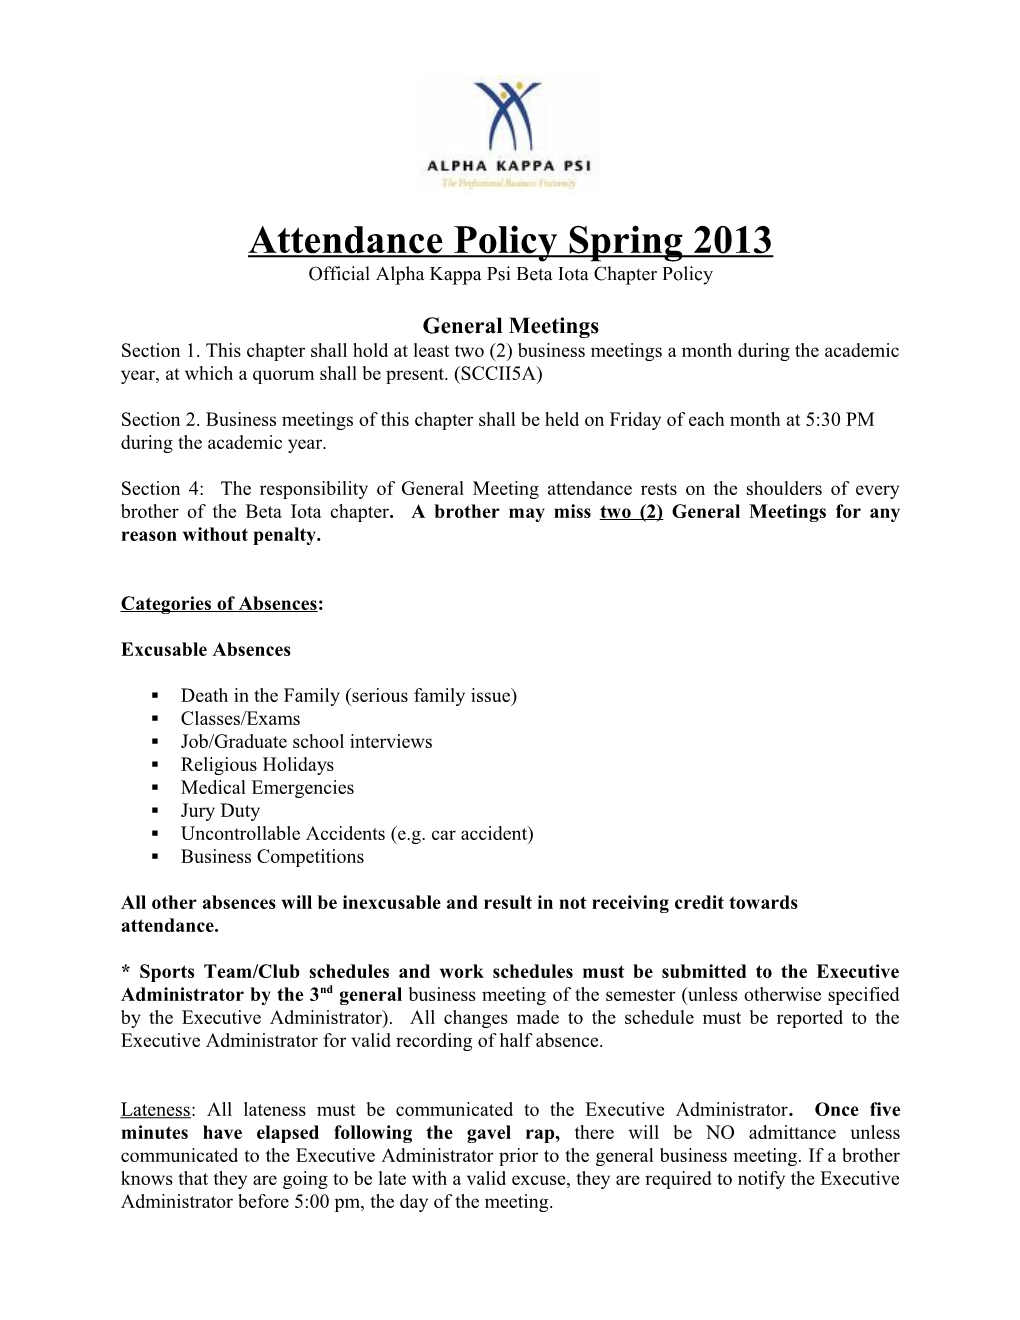 Attendance Policy Spring 2013